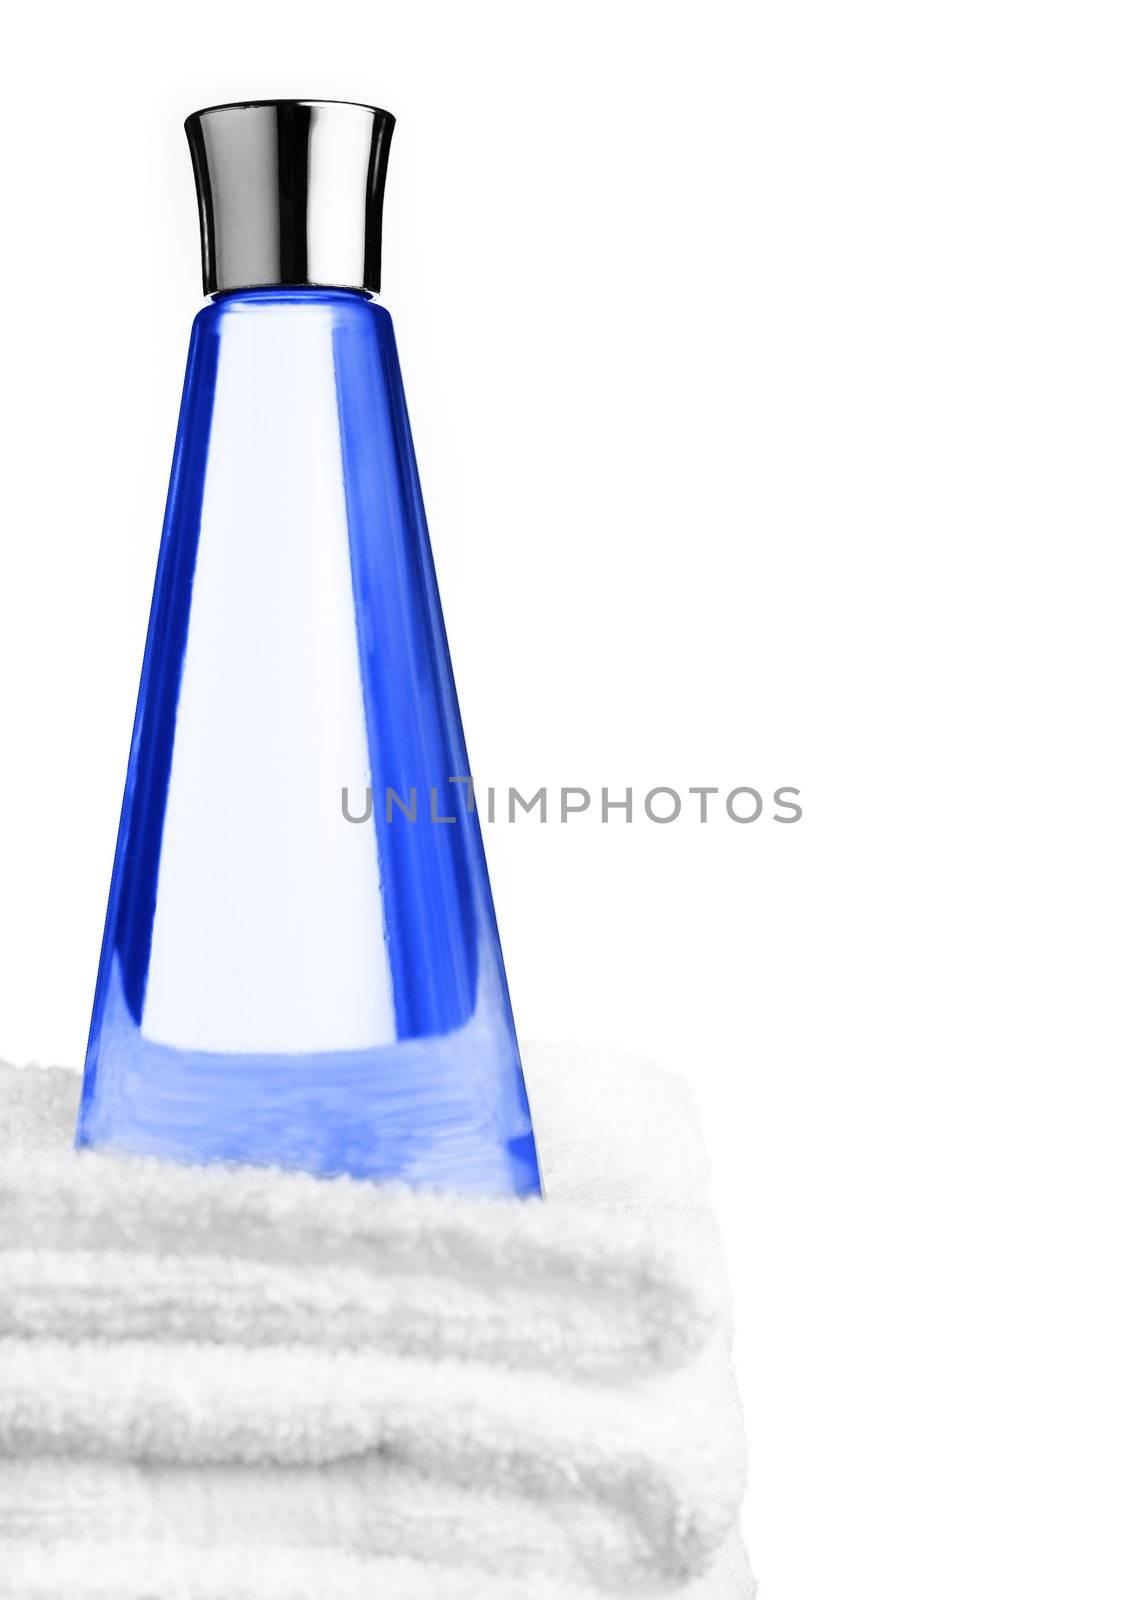 Shampoo and towels against a white background.